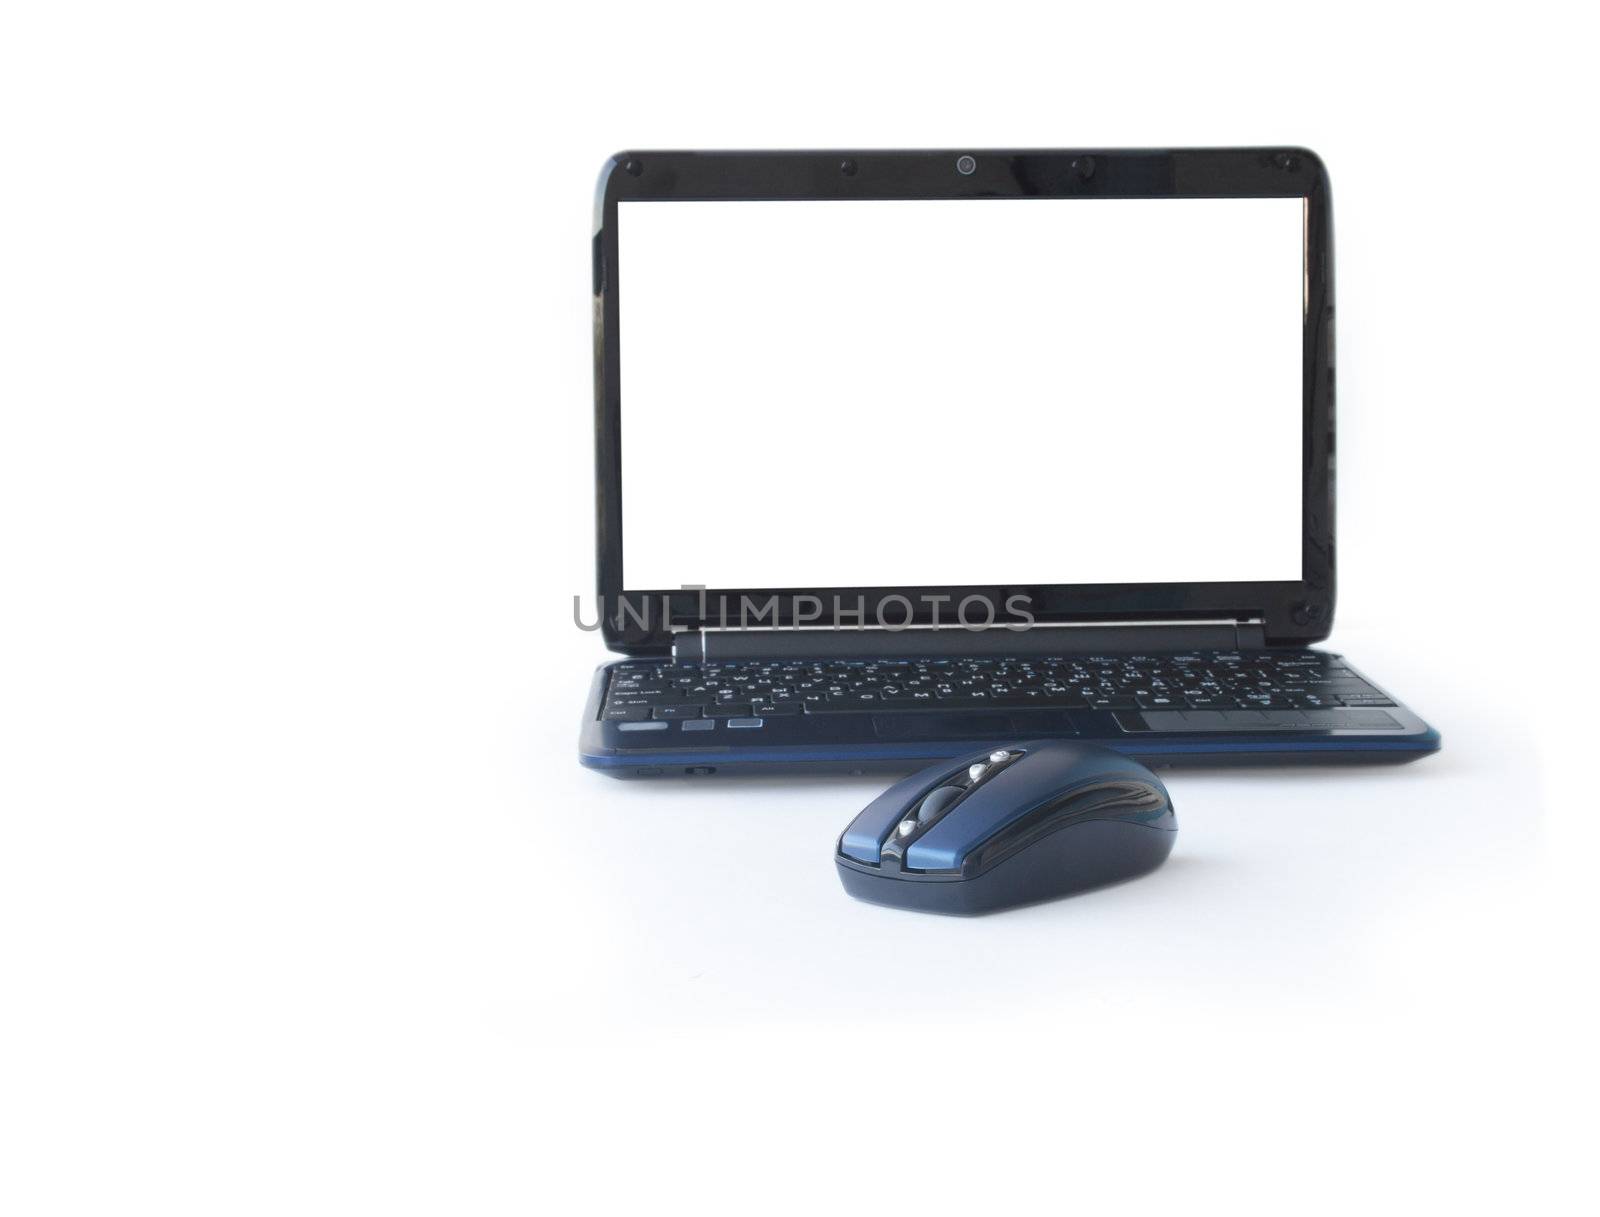 Computer mouse near modern laptop with blank isolated screen for your images